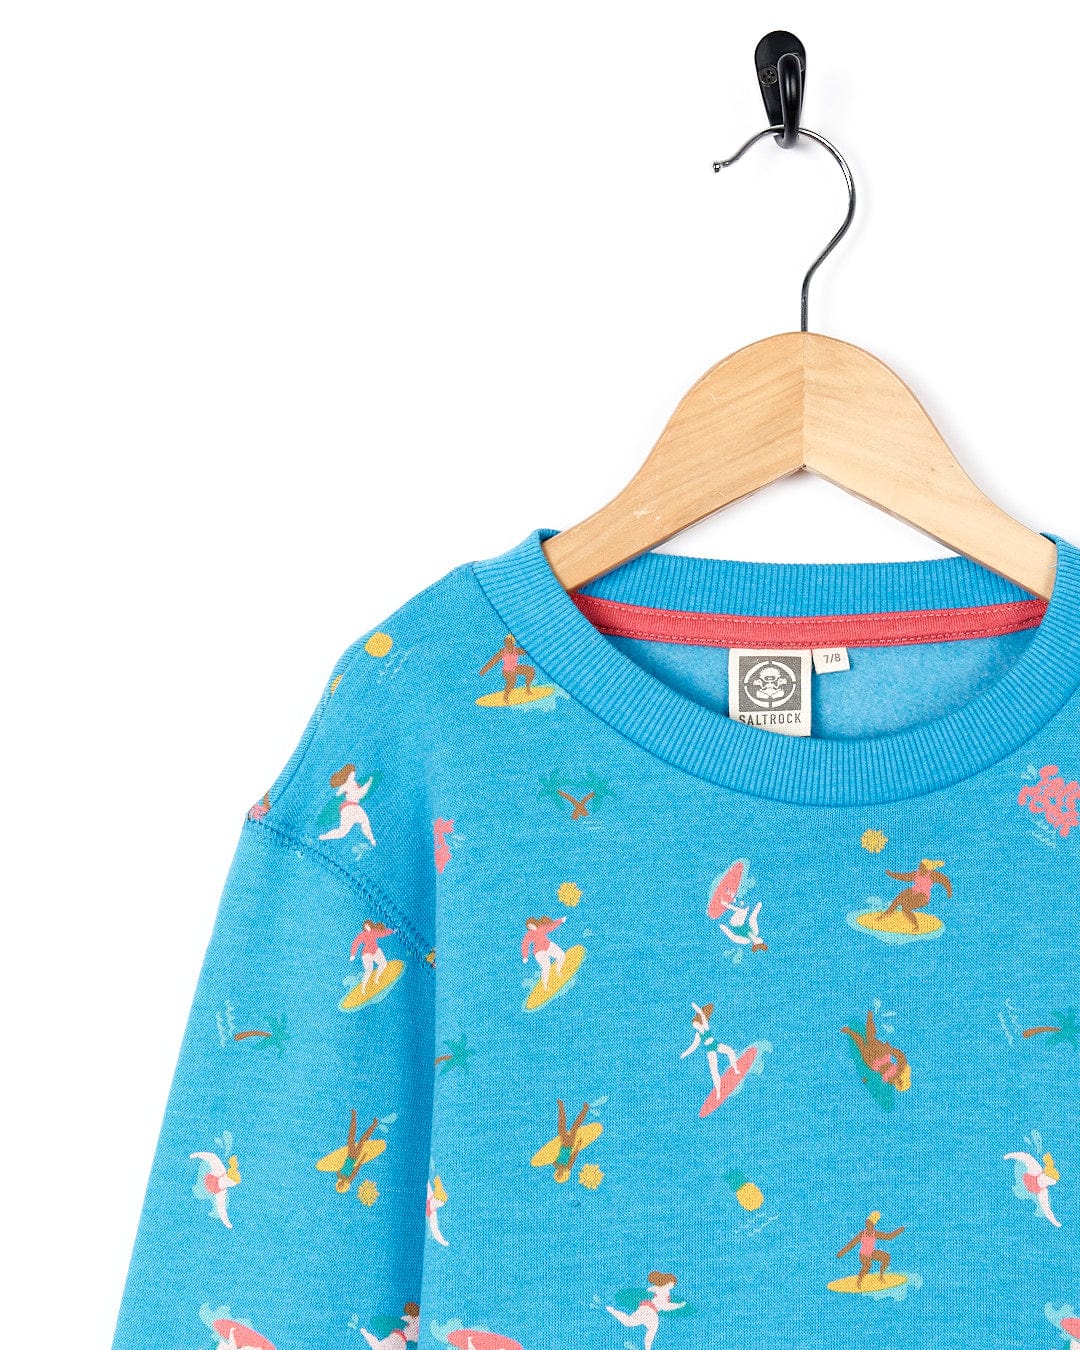 A Surf Sisters Kids Recycled Long Sleeve Sweatshirt with a print of surfers and surfboards by Saltrock.